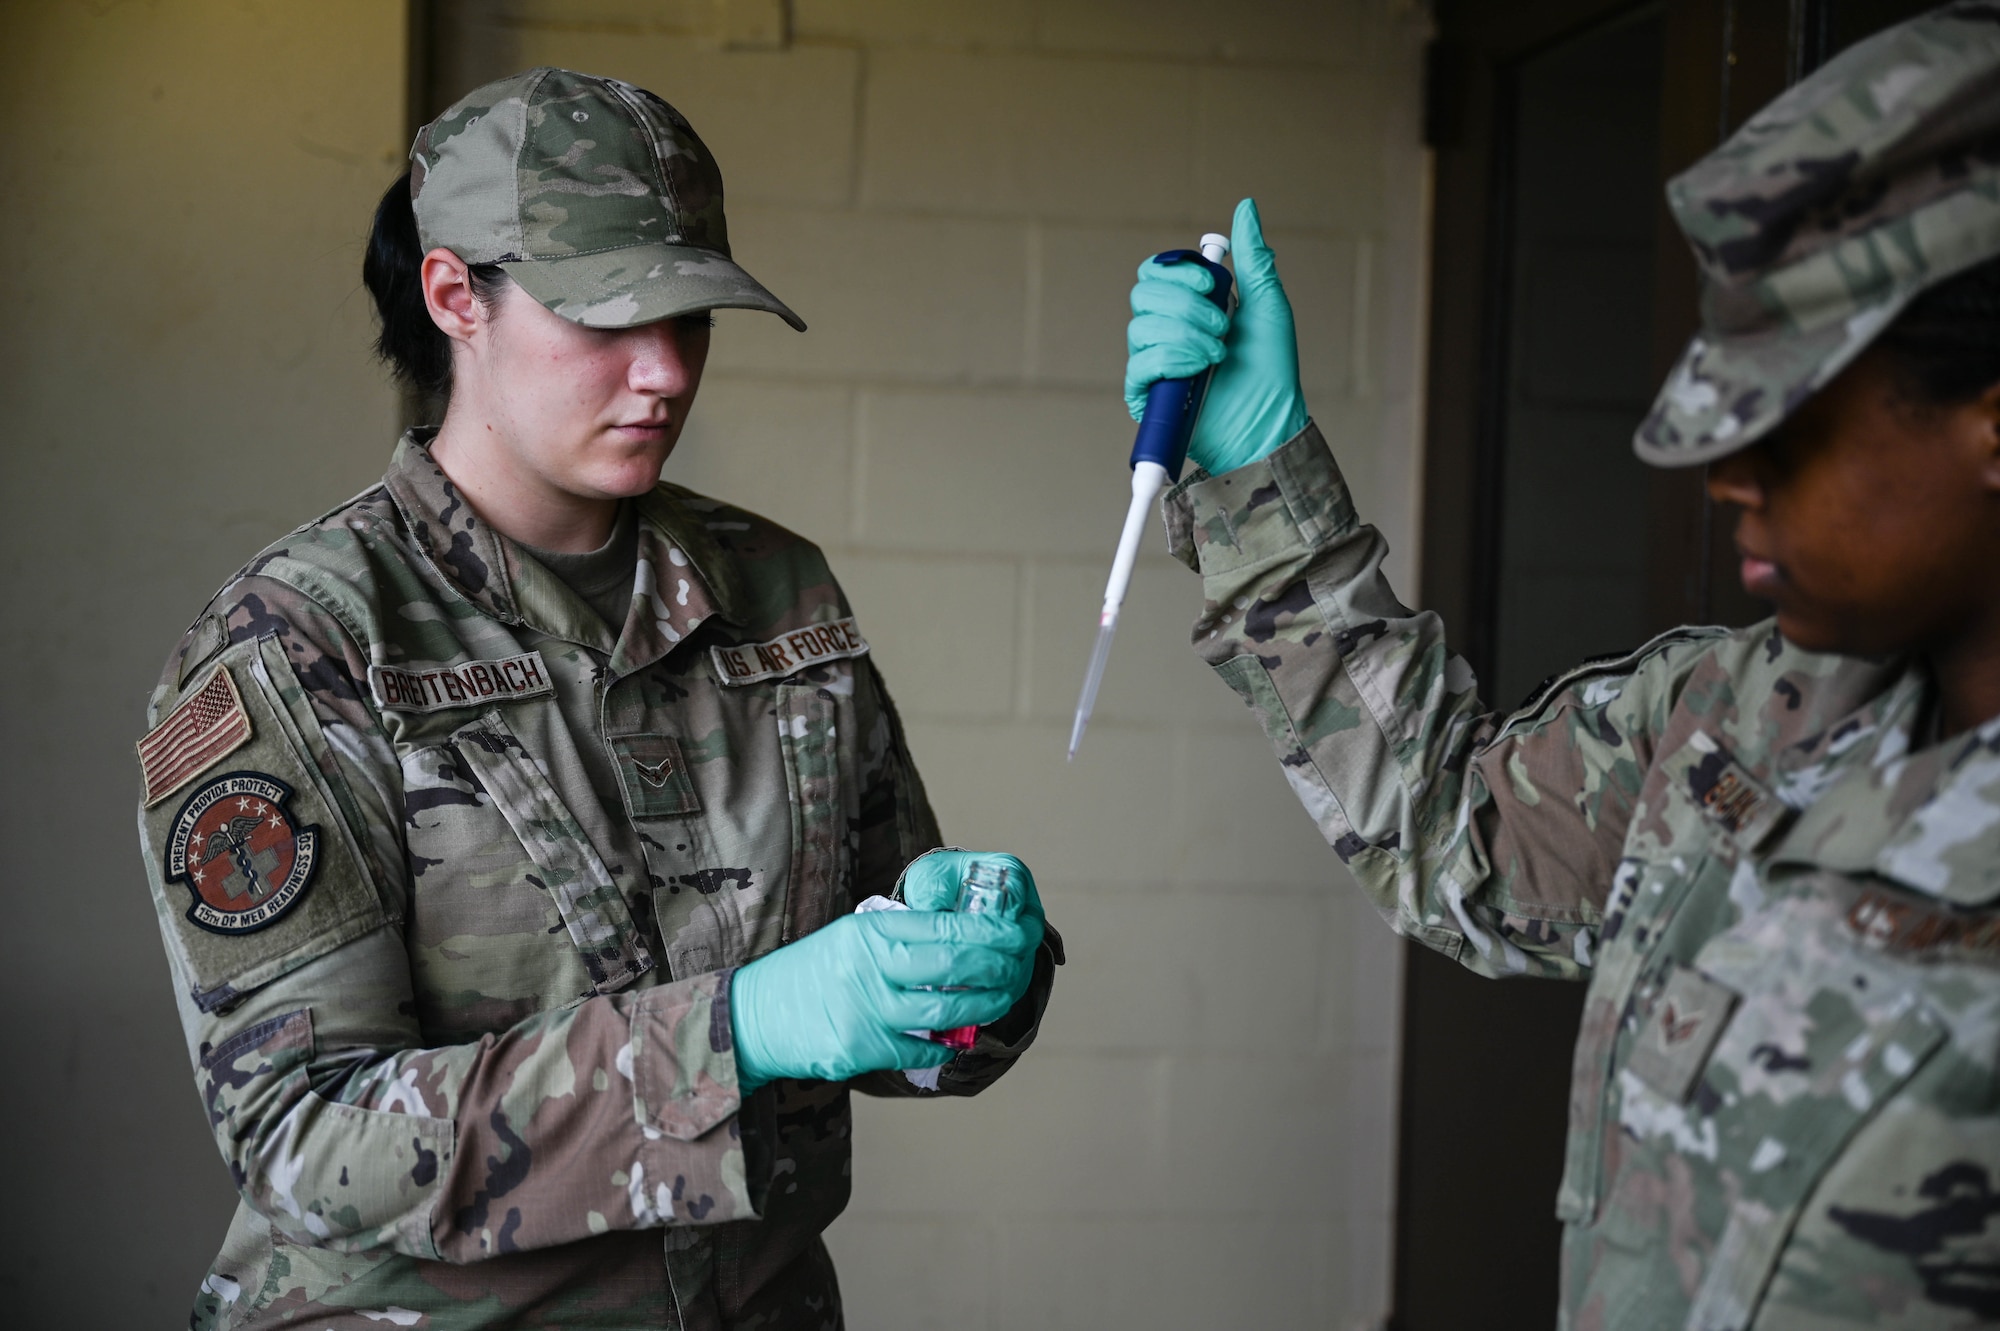 Airman 1st Class Sydni Breitenbach and Senior Airman Christina Burks, 15th Operational Medical Readiness Squadron bioenvironmental engineering journeymen, perform a pH test of a water sample taken from a Potable Water Module at the Hale Aina Dining Facility at Joint Base Pearl Harbor-Hickam, Hawaii, Dec. 10, 2021. The bioenvironmental team conducted pH tests, free chlorine tests and volatile organic compound screenings at several different Air Force sites on JBPHH to support the Navy’s sampling effort and plans to continue to test 17 various sites. (U.S. Air Force photo by Staff Sgt. Alan Ricker)